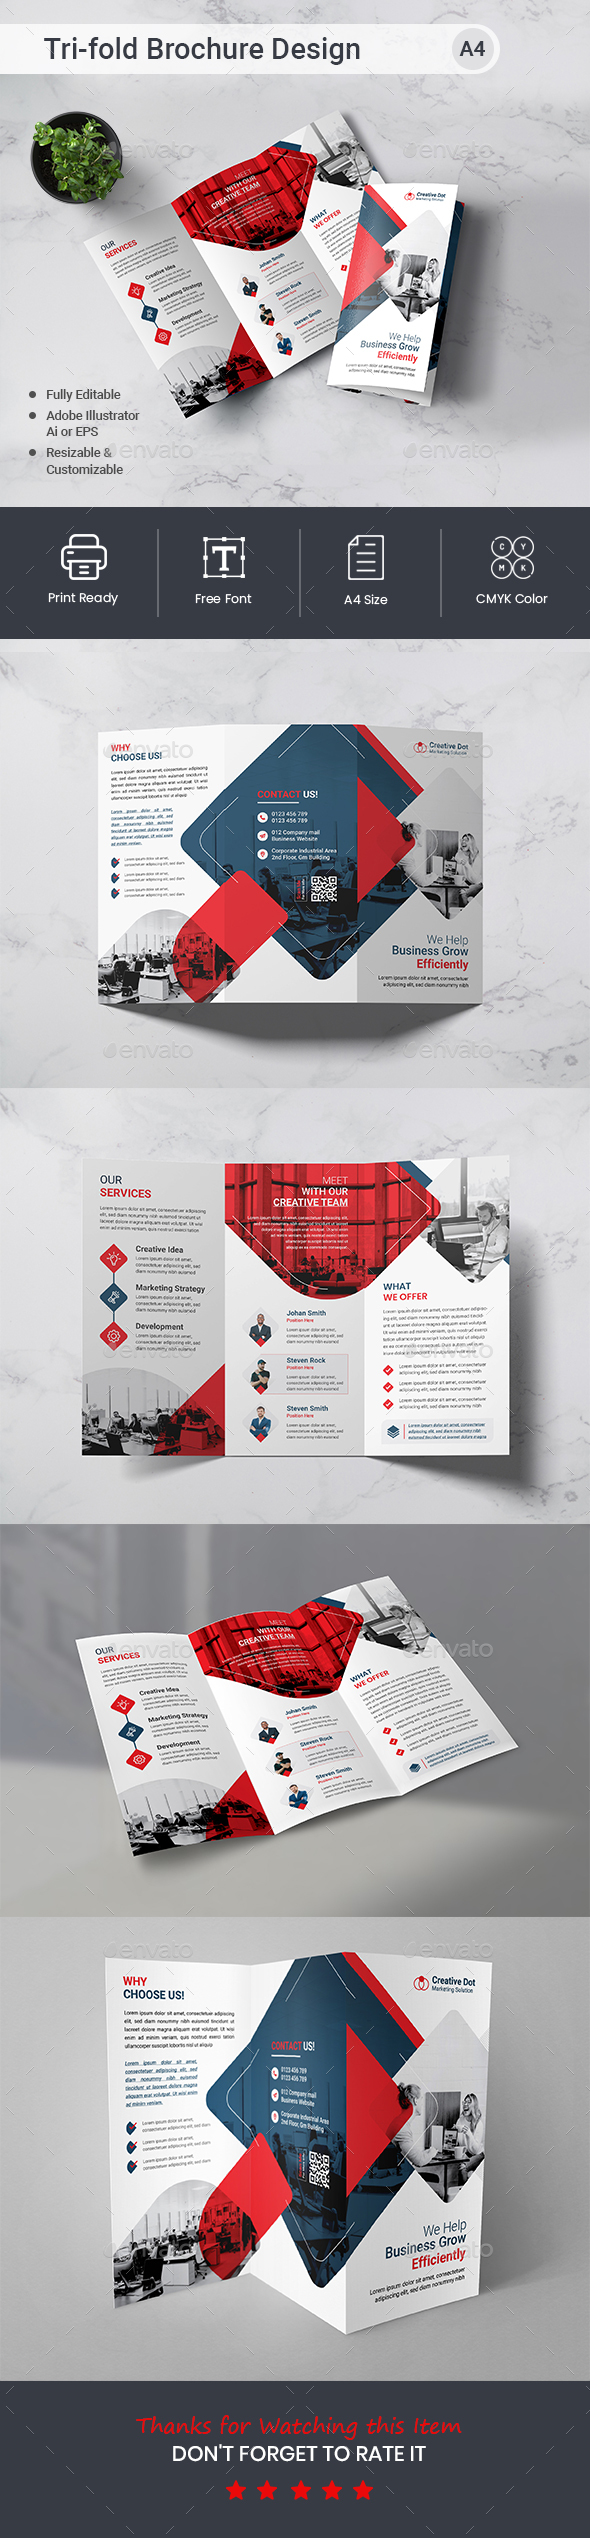 [DOWNLOAD]Trifold Brochure Template